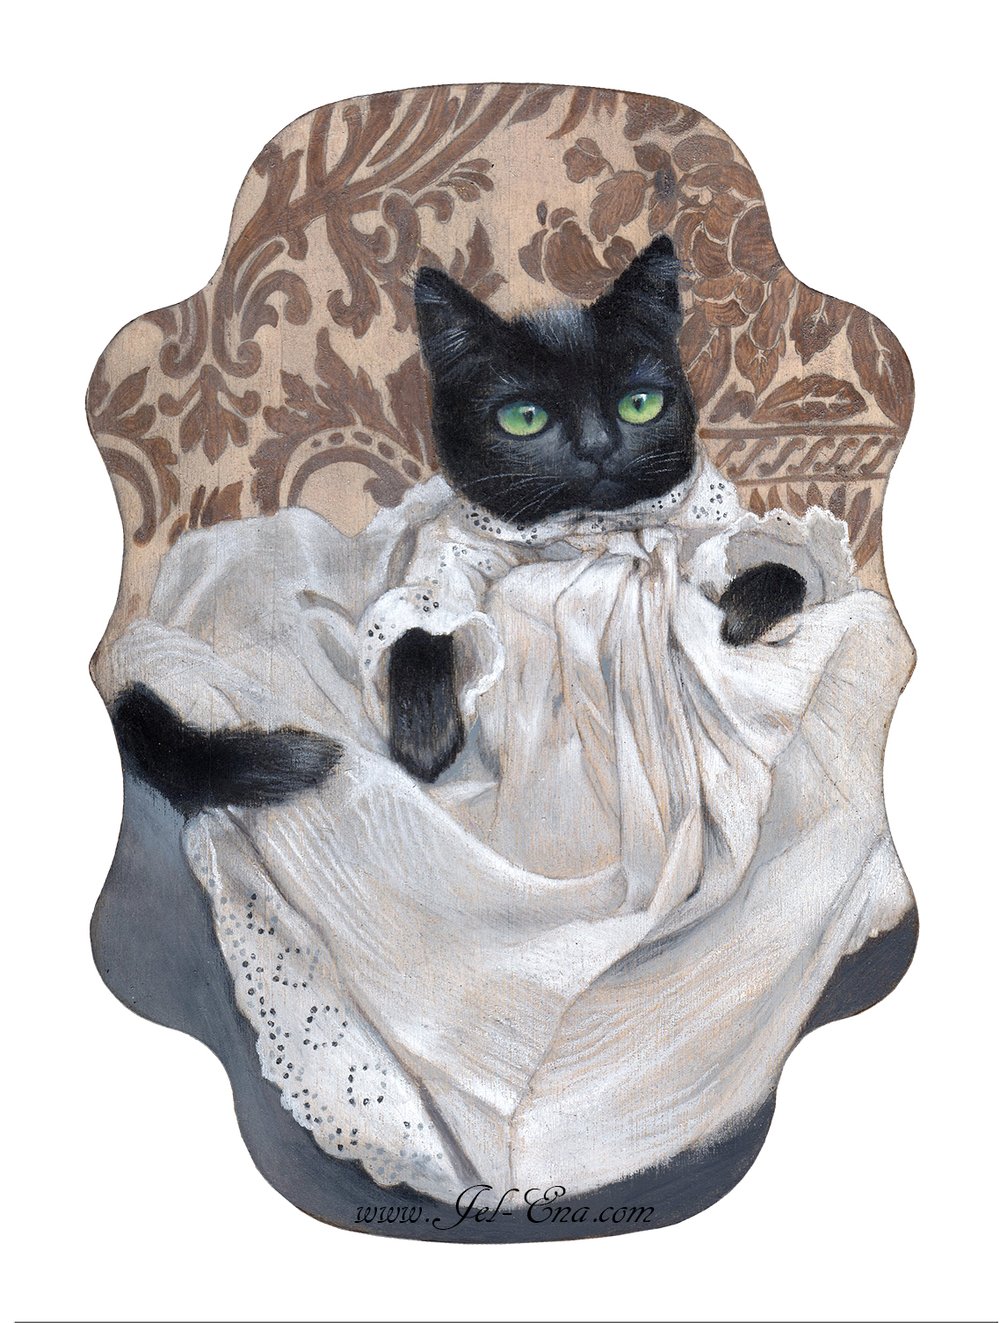 Image of "Maurice Edward Victorian Cat" Limited Edition Fine Art Print